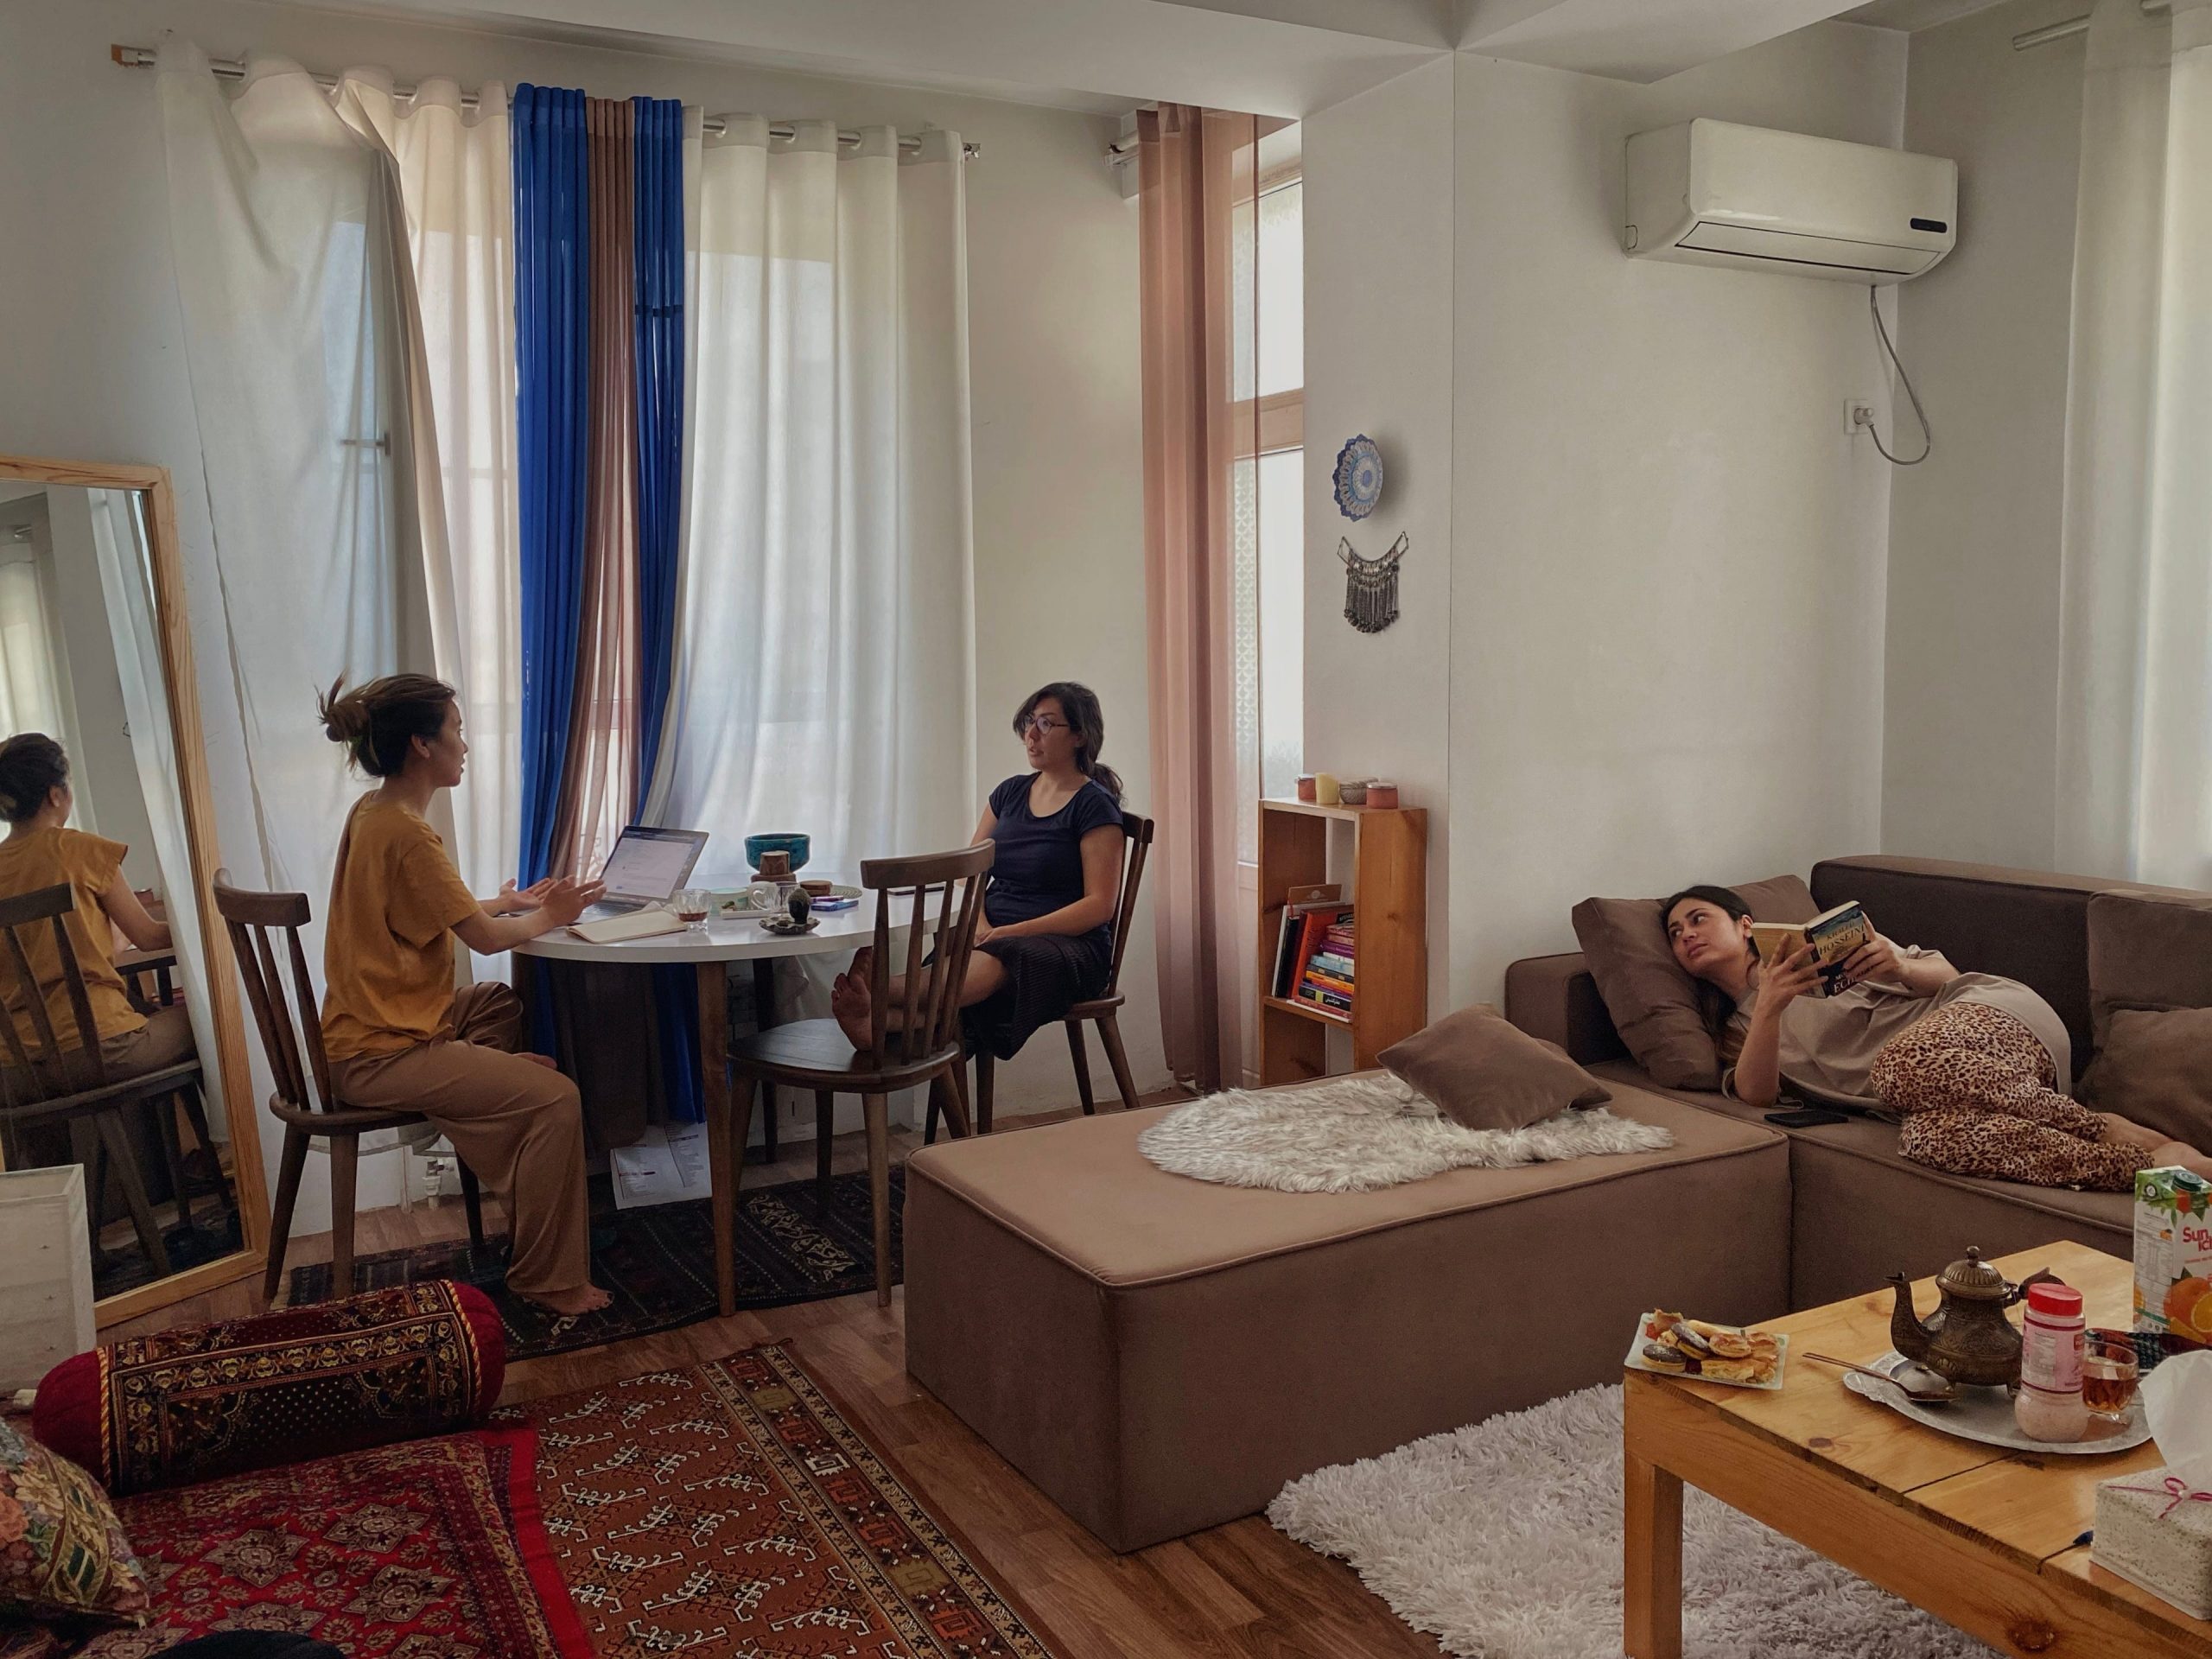 Two women sit at a table while a third lies on the couch.